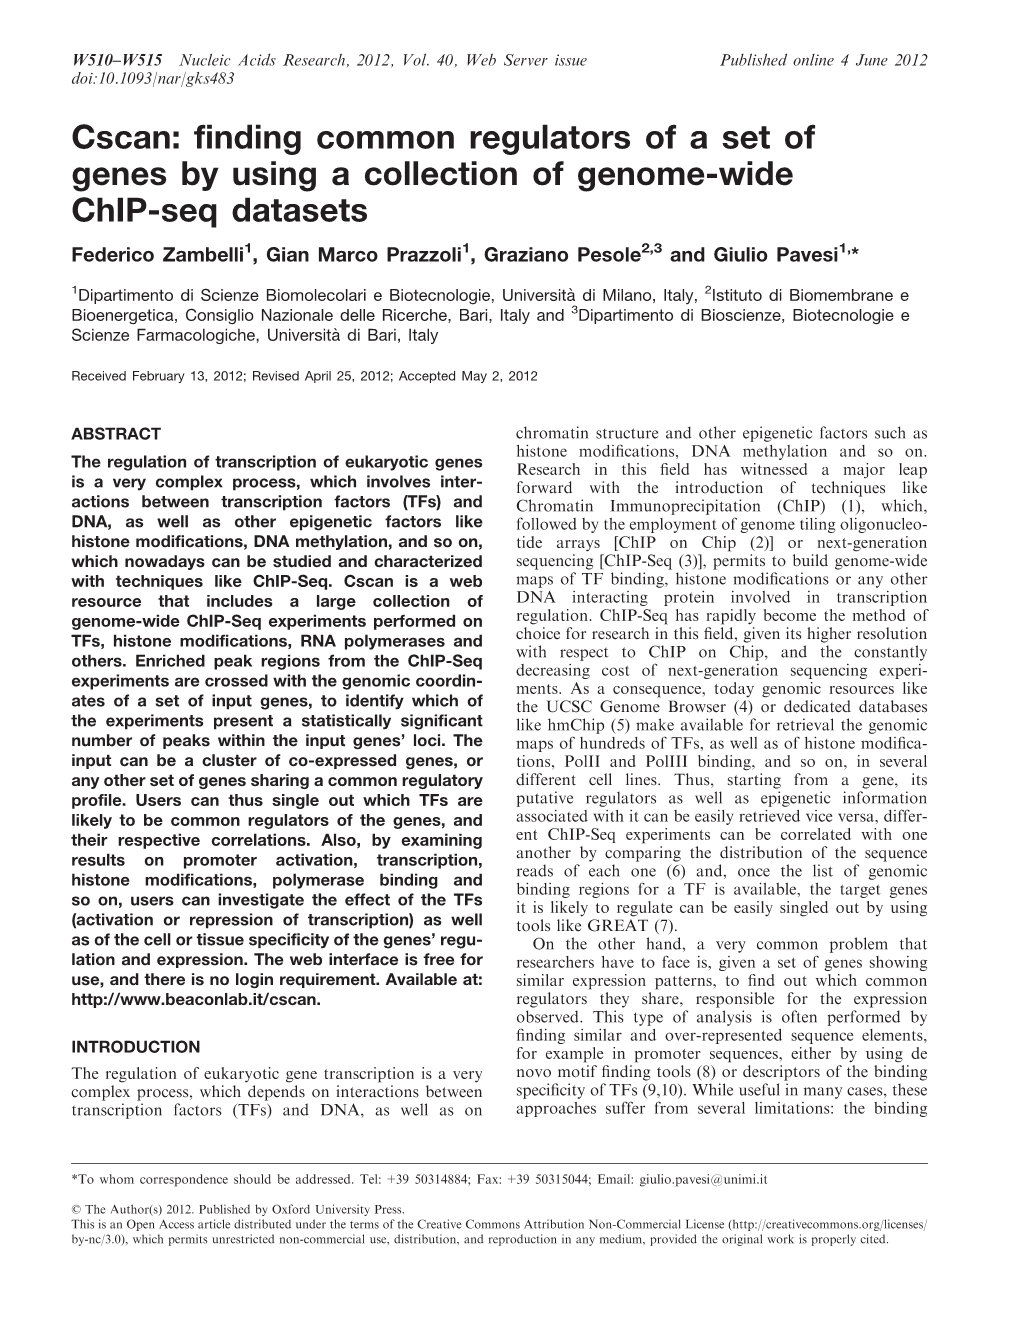 Finding Common Regulators of a Set of Genes by Using a Collection of Genome-Wide Chip-Seq Datasets